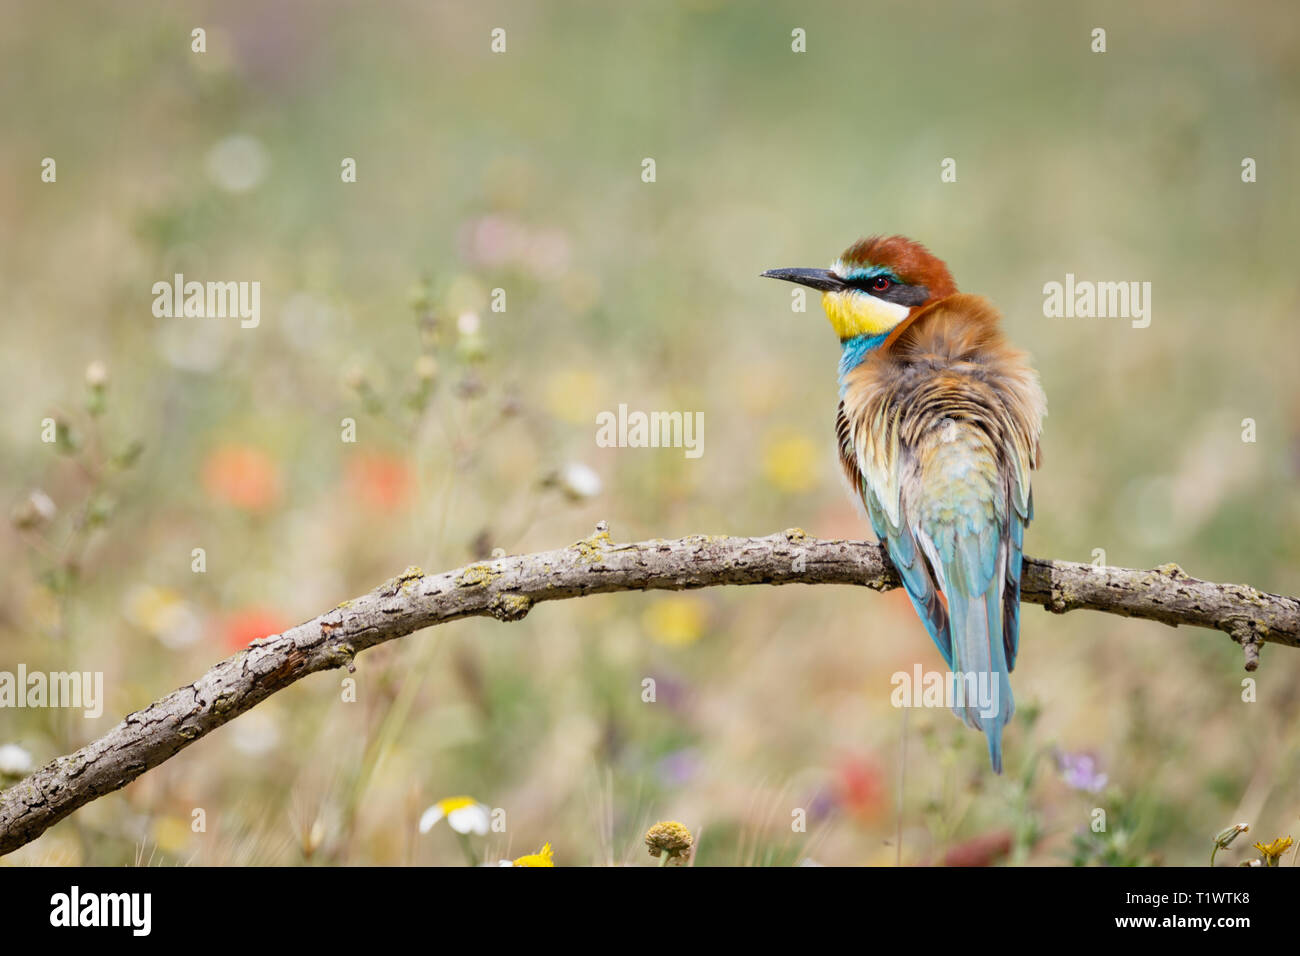 European Bee-eater (Merops apiaster), adult perched on branch, Lleida Steppes, Catalonia, Spain Stock Photo